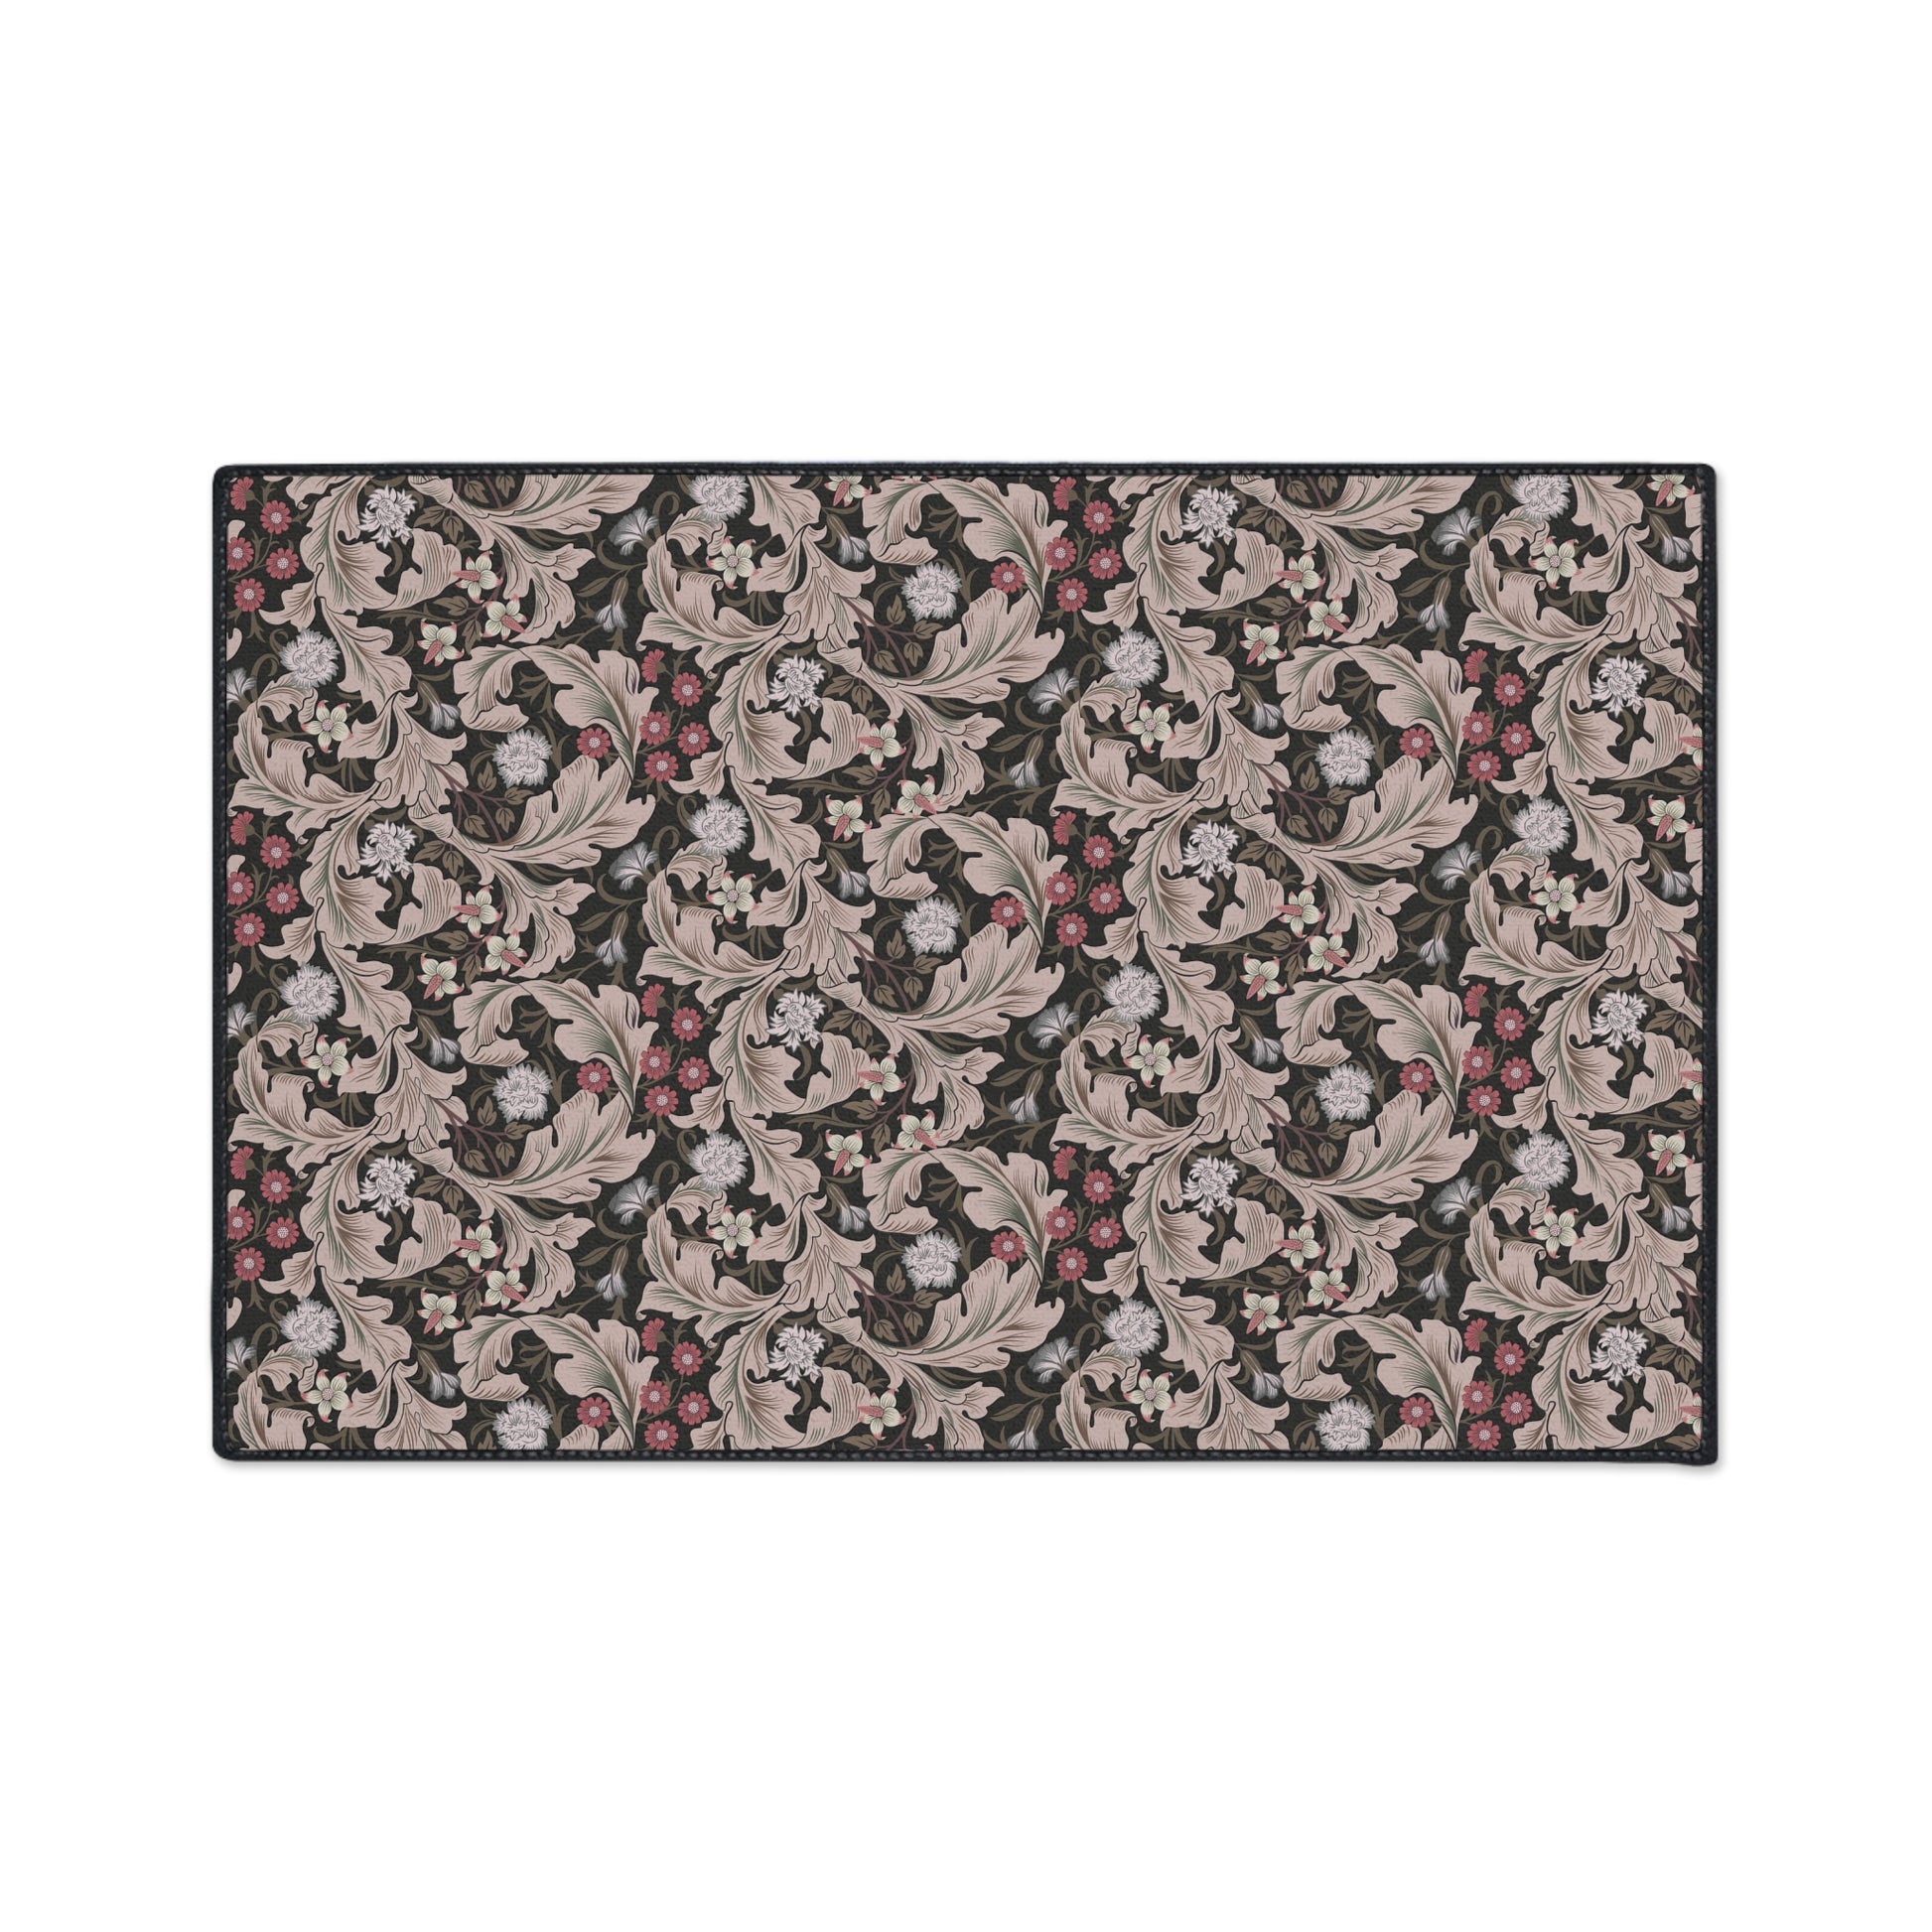 william-morris-co-heavy-duty-floor-mat-leicester-collection-mocha-3